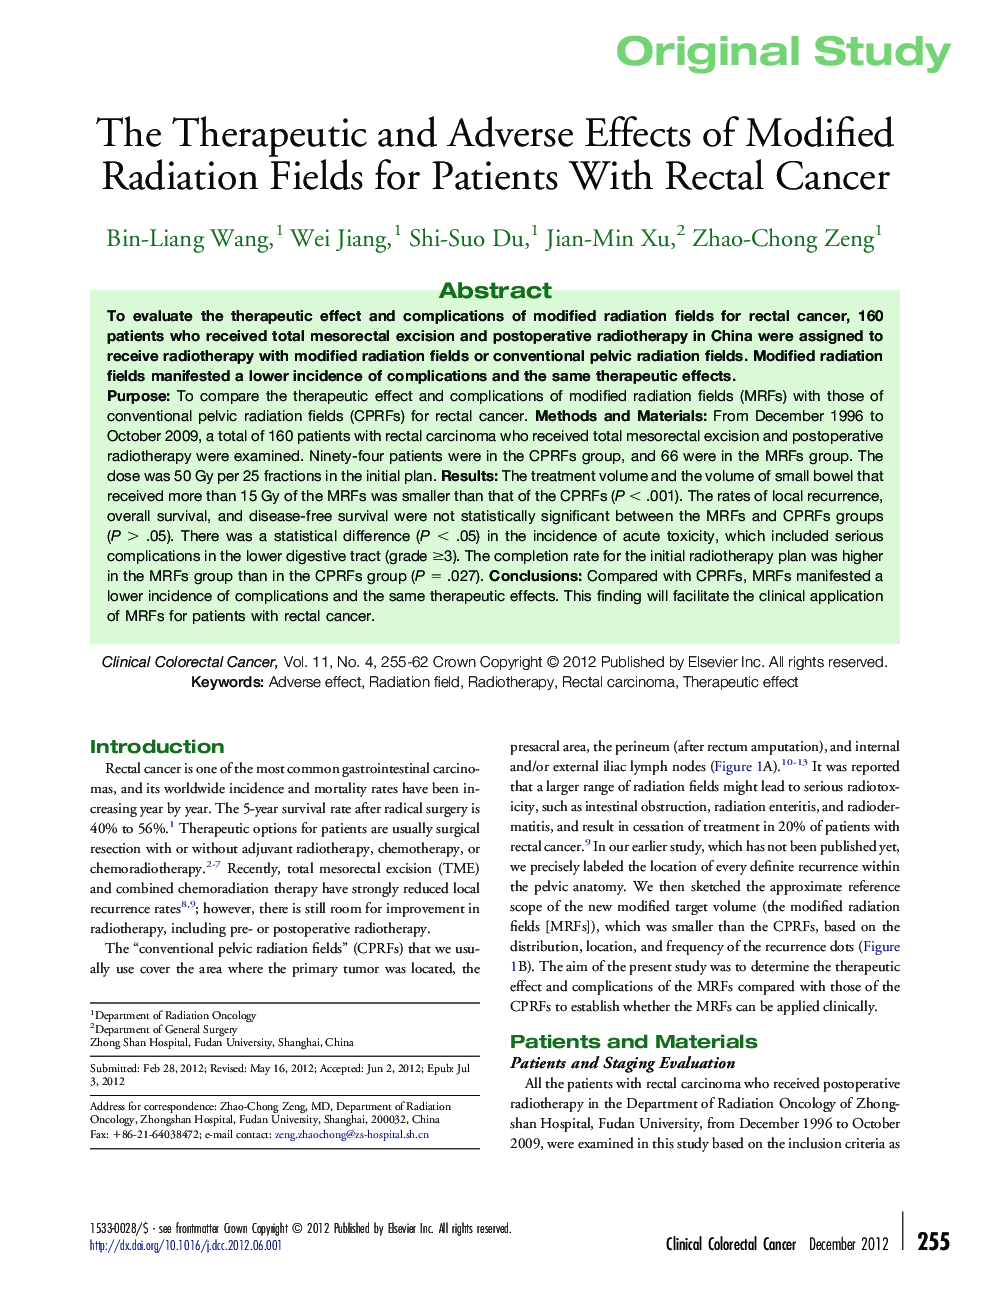 The Therapeutic and Adverse Effects of Modified Radiation Fields for Patients With Rectal Cancer